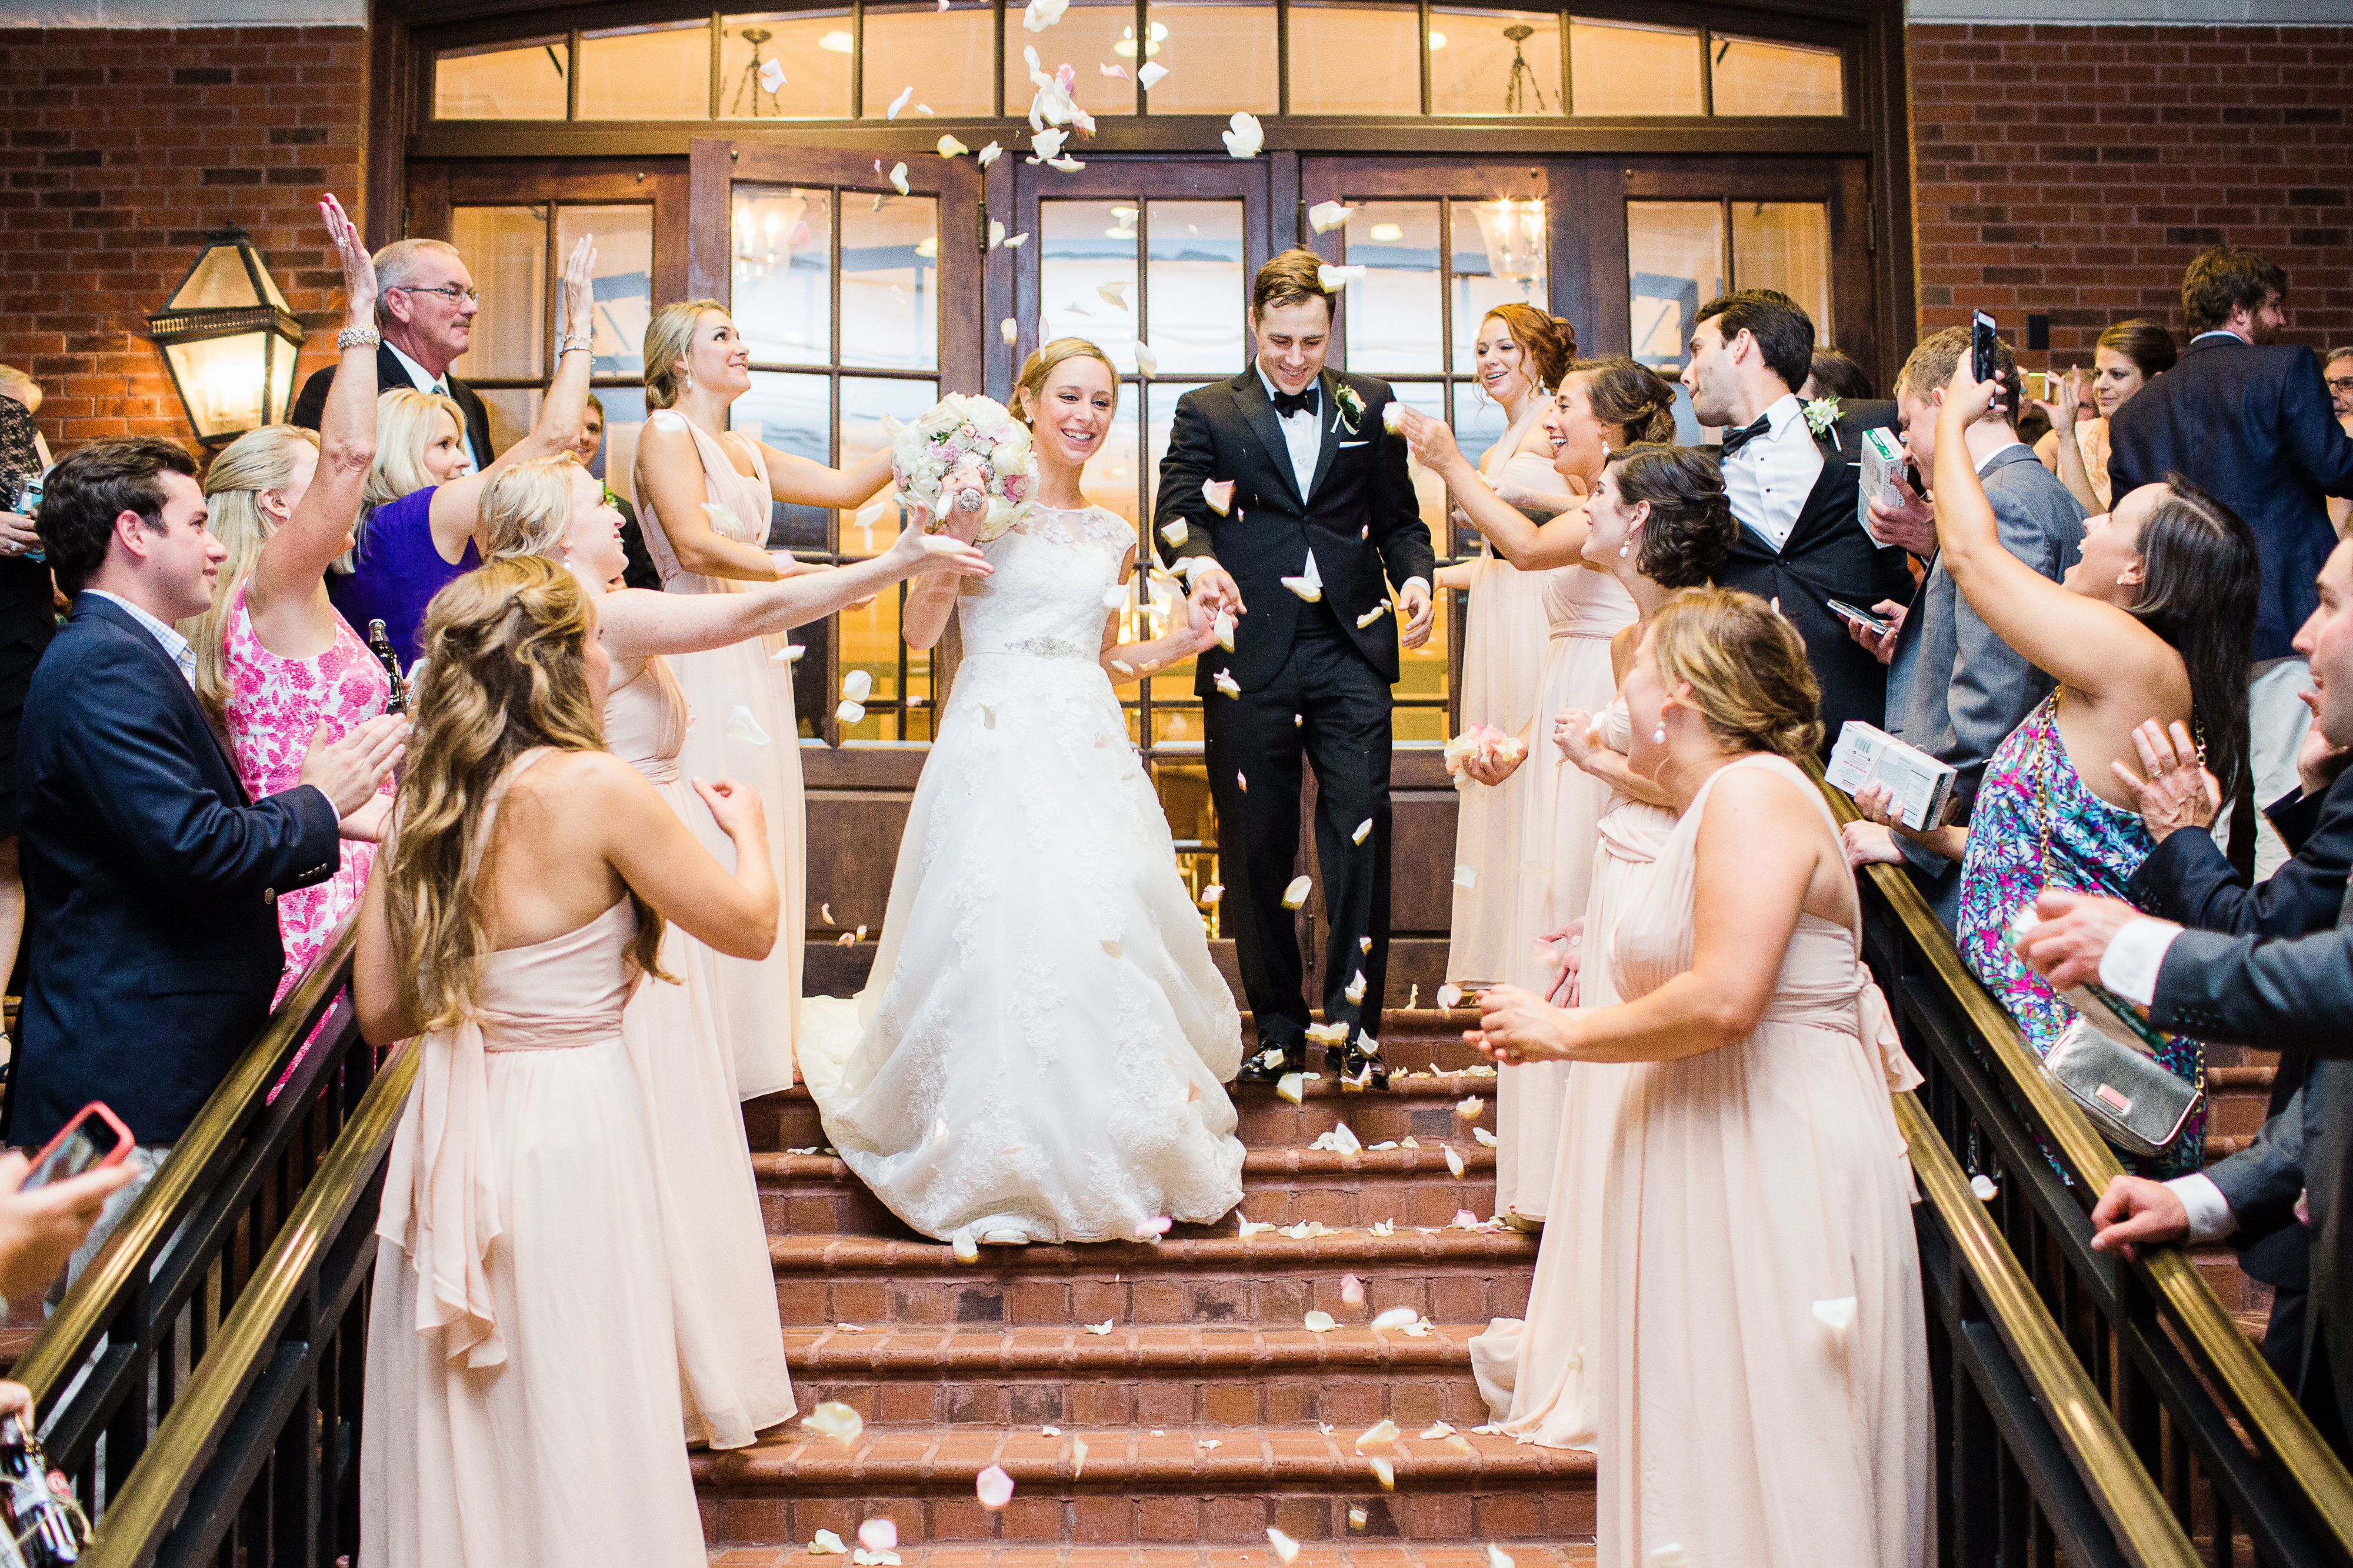 View More: http://robynvandykephotography.pass.us/carlyearlwedding